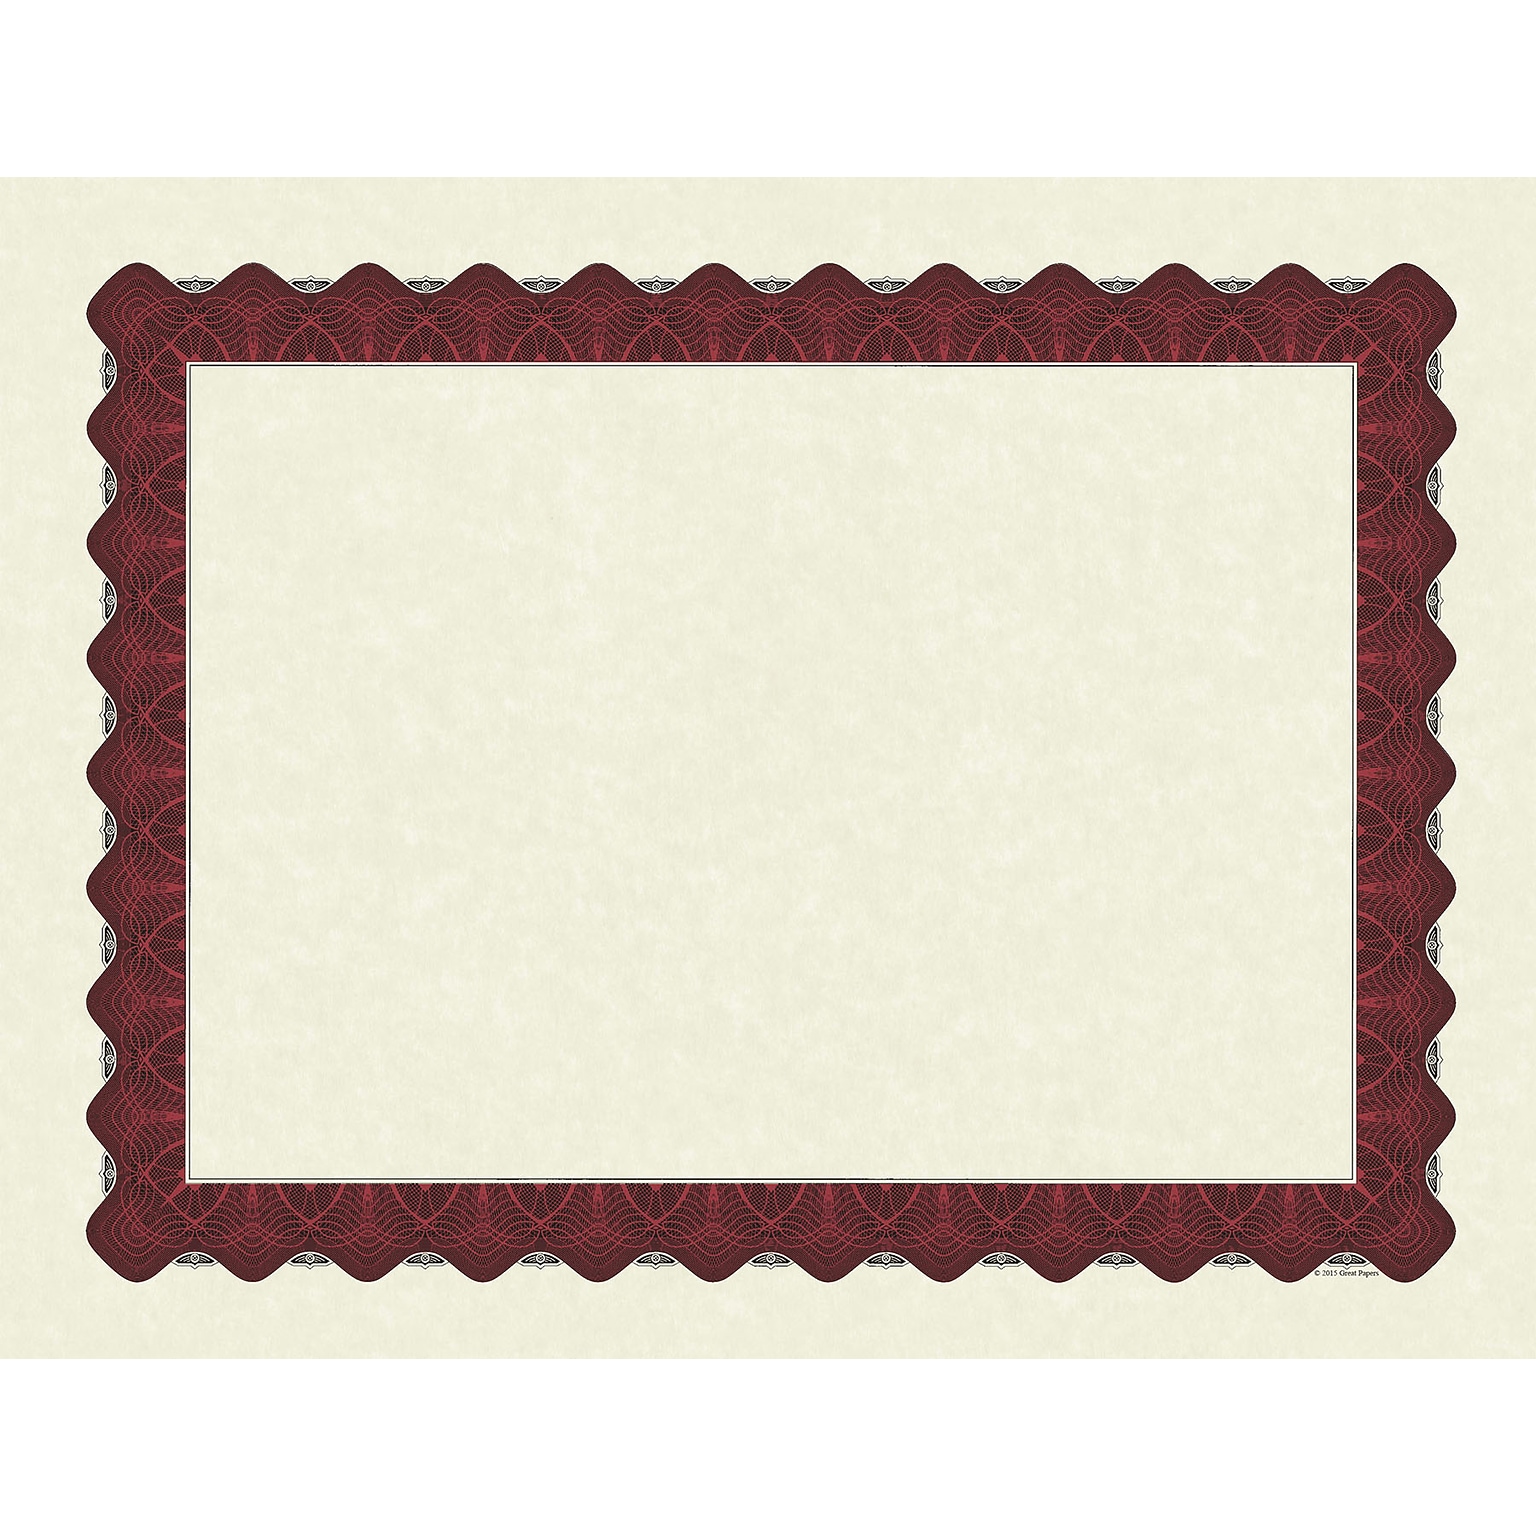 Great Papers Certificates, 8.5 x 11, Beige and Mattec Red, 25/Pack (934125)